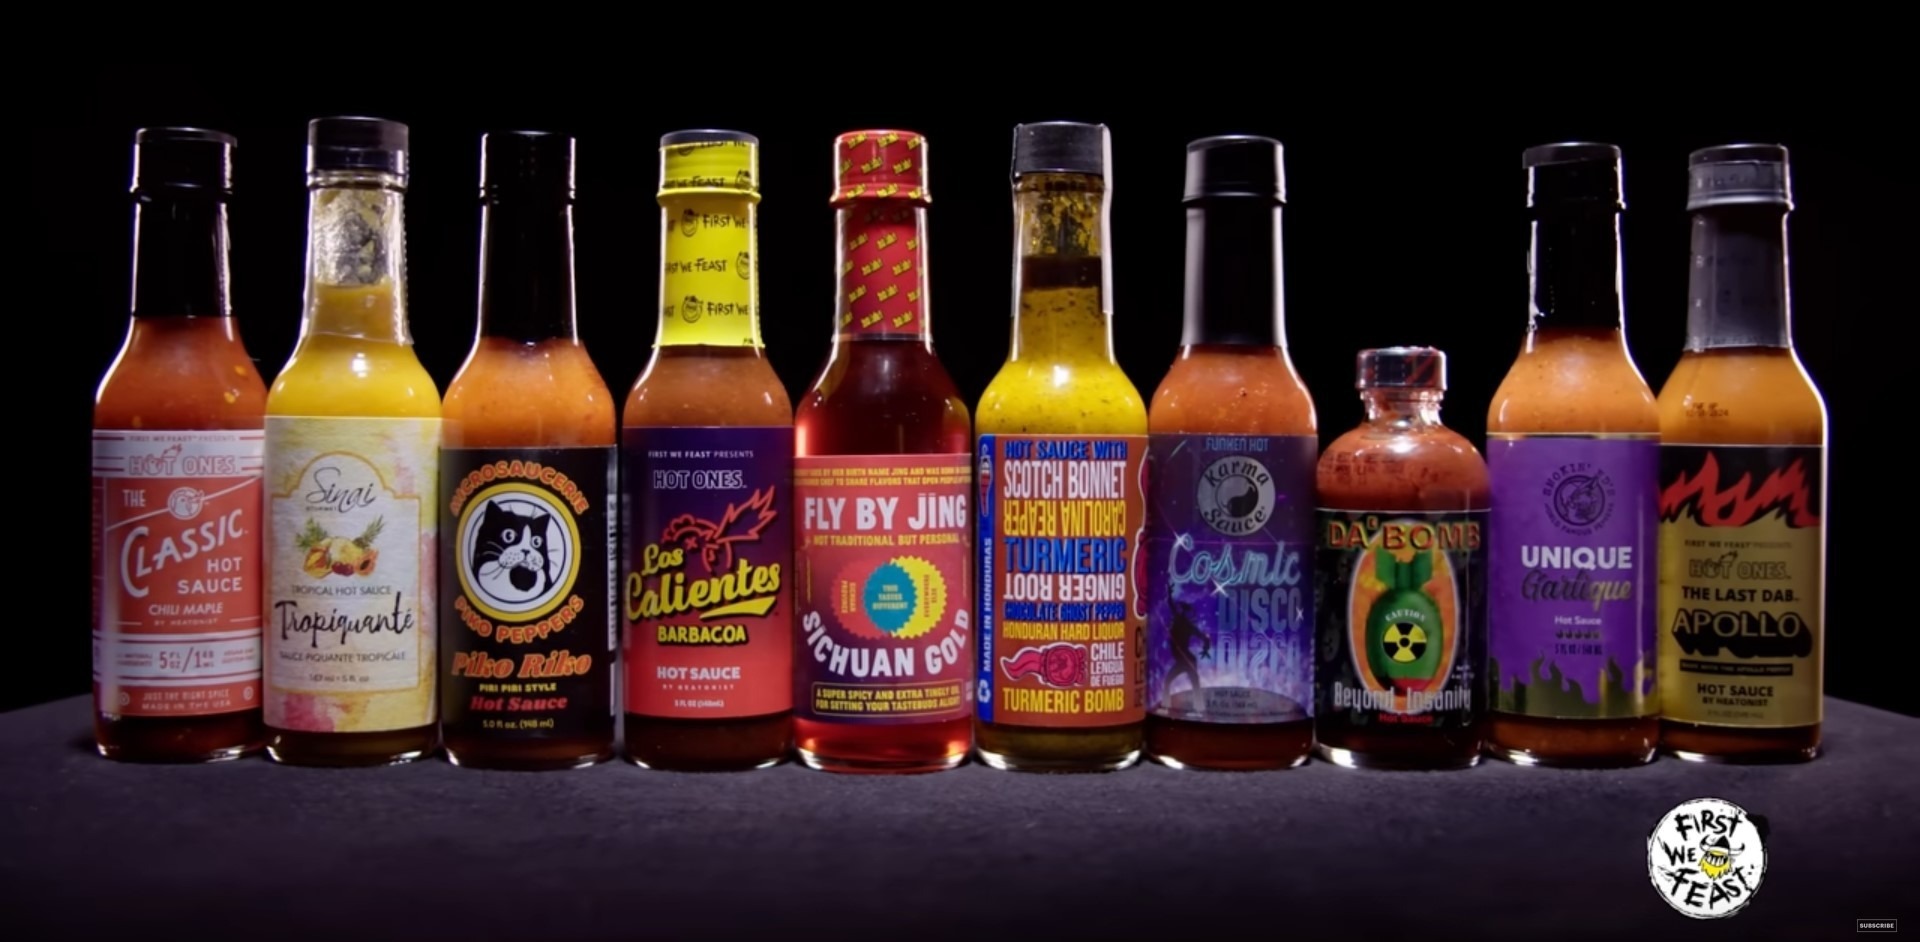 The Classic, Hot Ones Hot Sauce